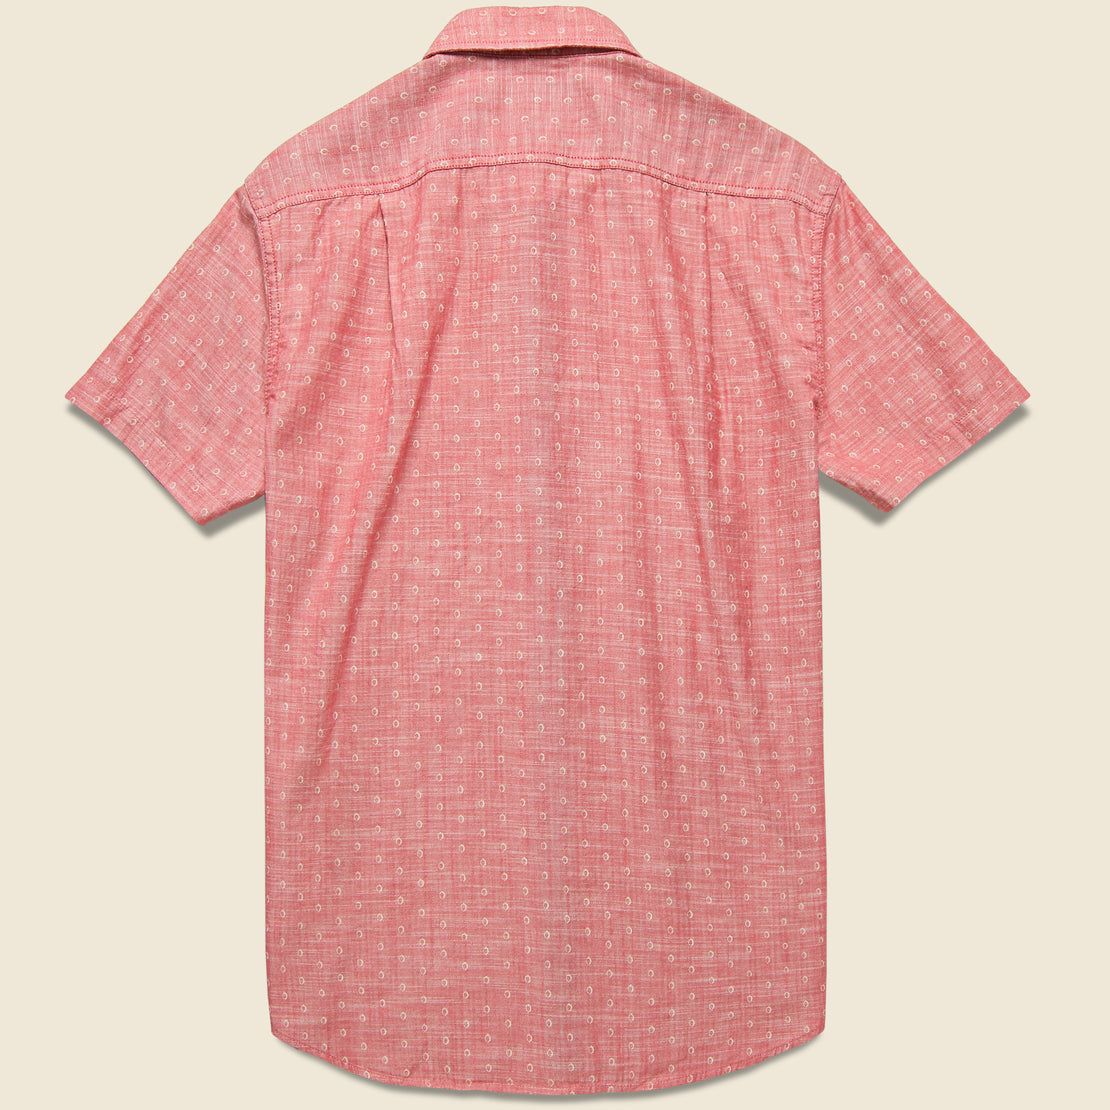 Falling Oval Print Herringbone Shirt - Cranberry/White - Grayers - STAG Provisions - Tops - S/S Woven - Other Pattern